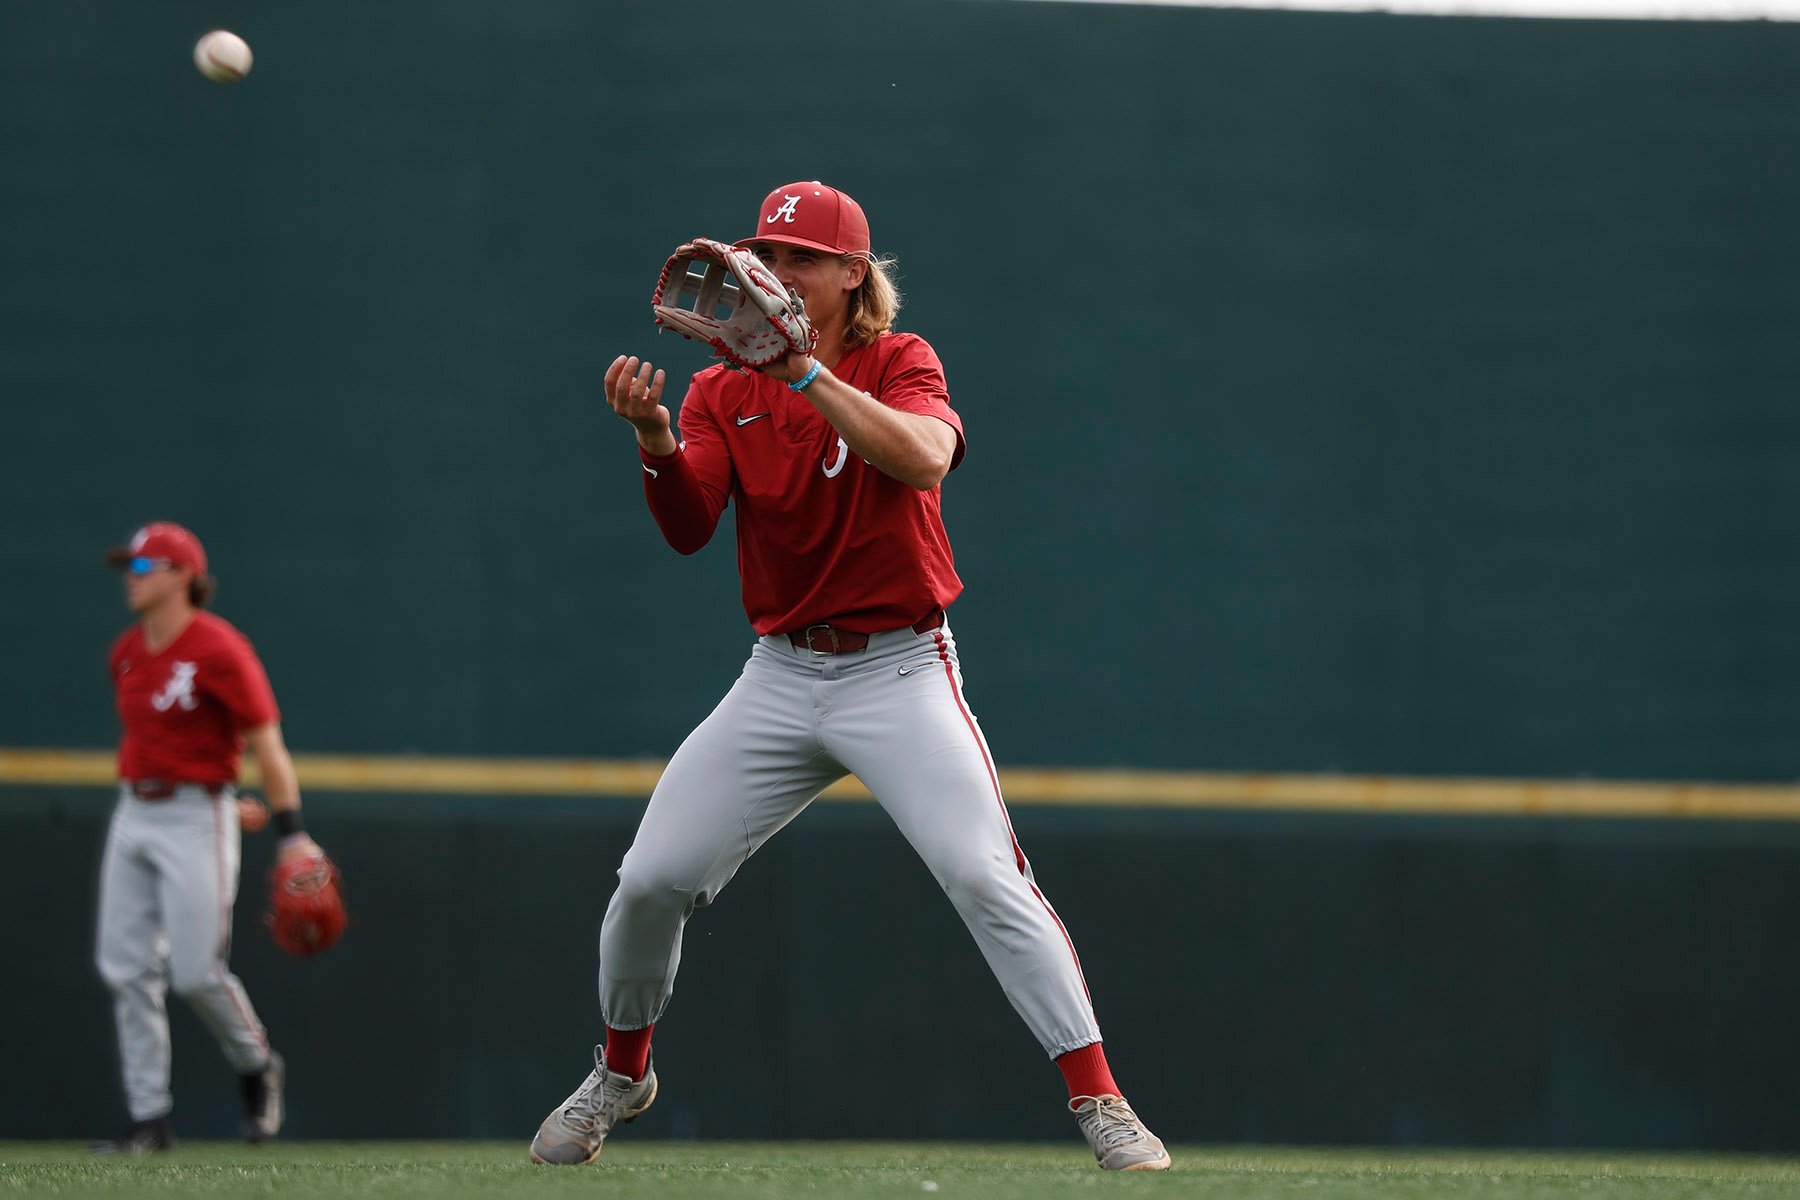 Roster movement for Alabama baseball continues WVUA 23